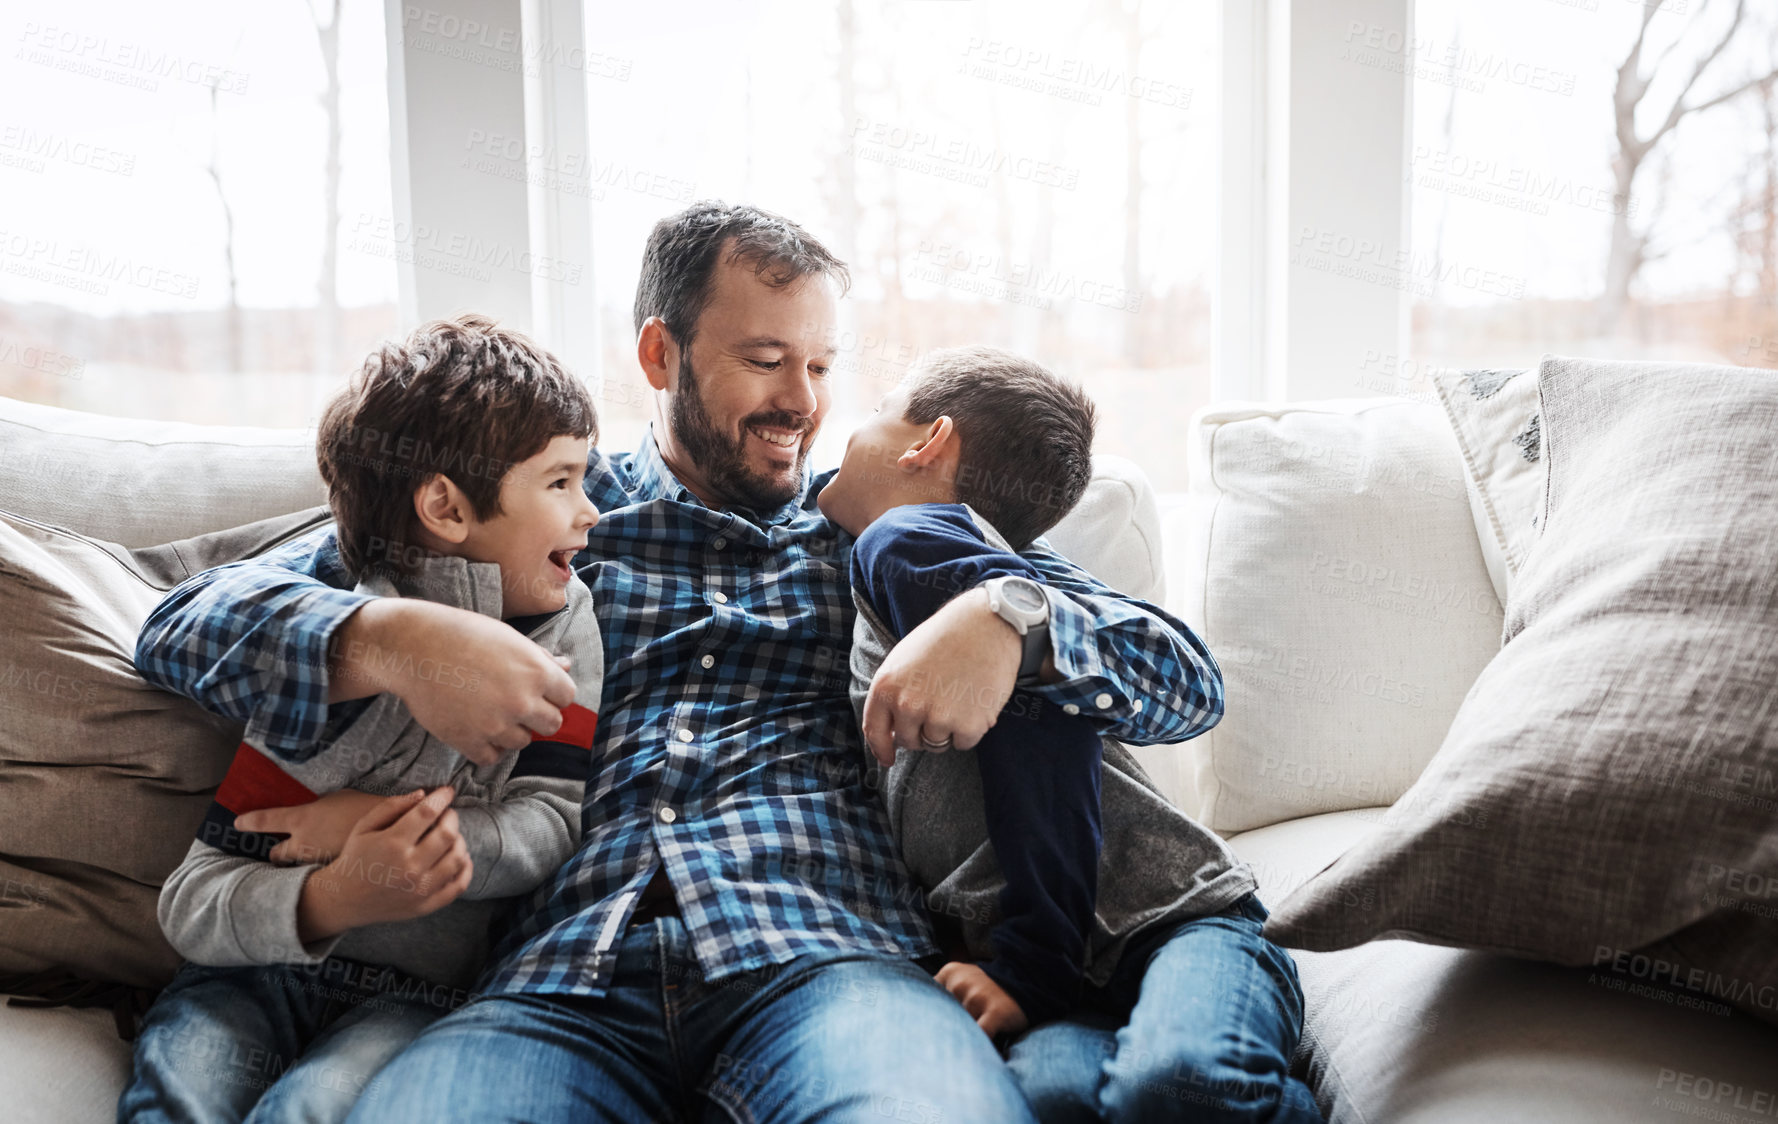 Buy stock photo Hug, playful and father with children on the sofa for love, care and relax in their family home. Happy, funny and dad with boy kids for quality time, affection and comedy on the couch of a house